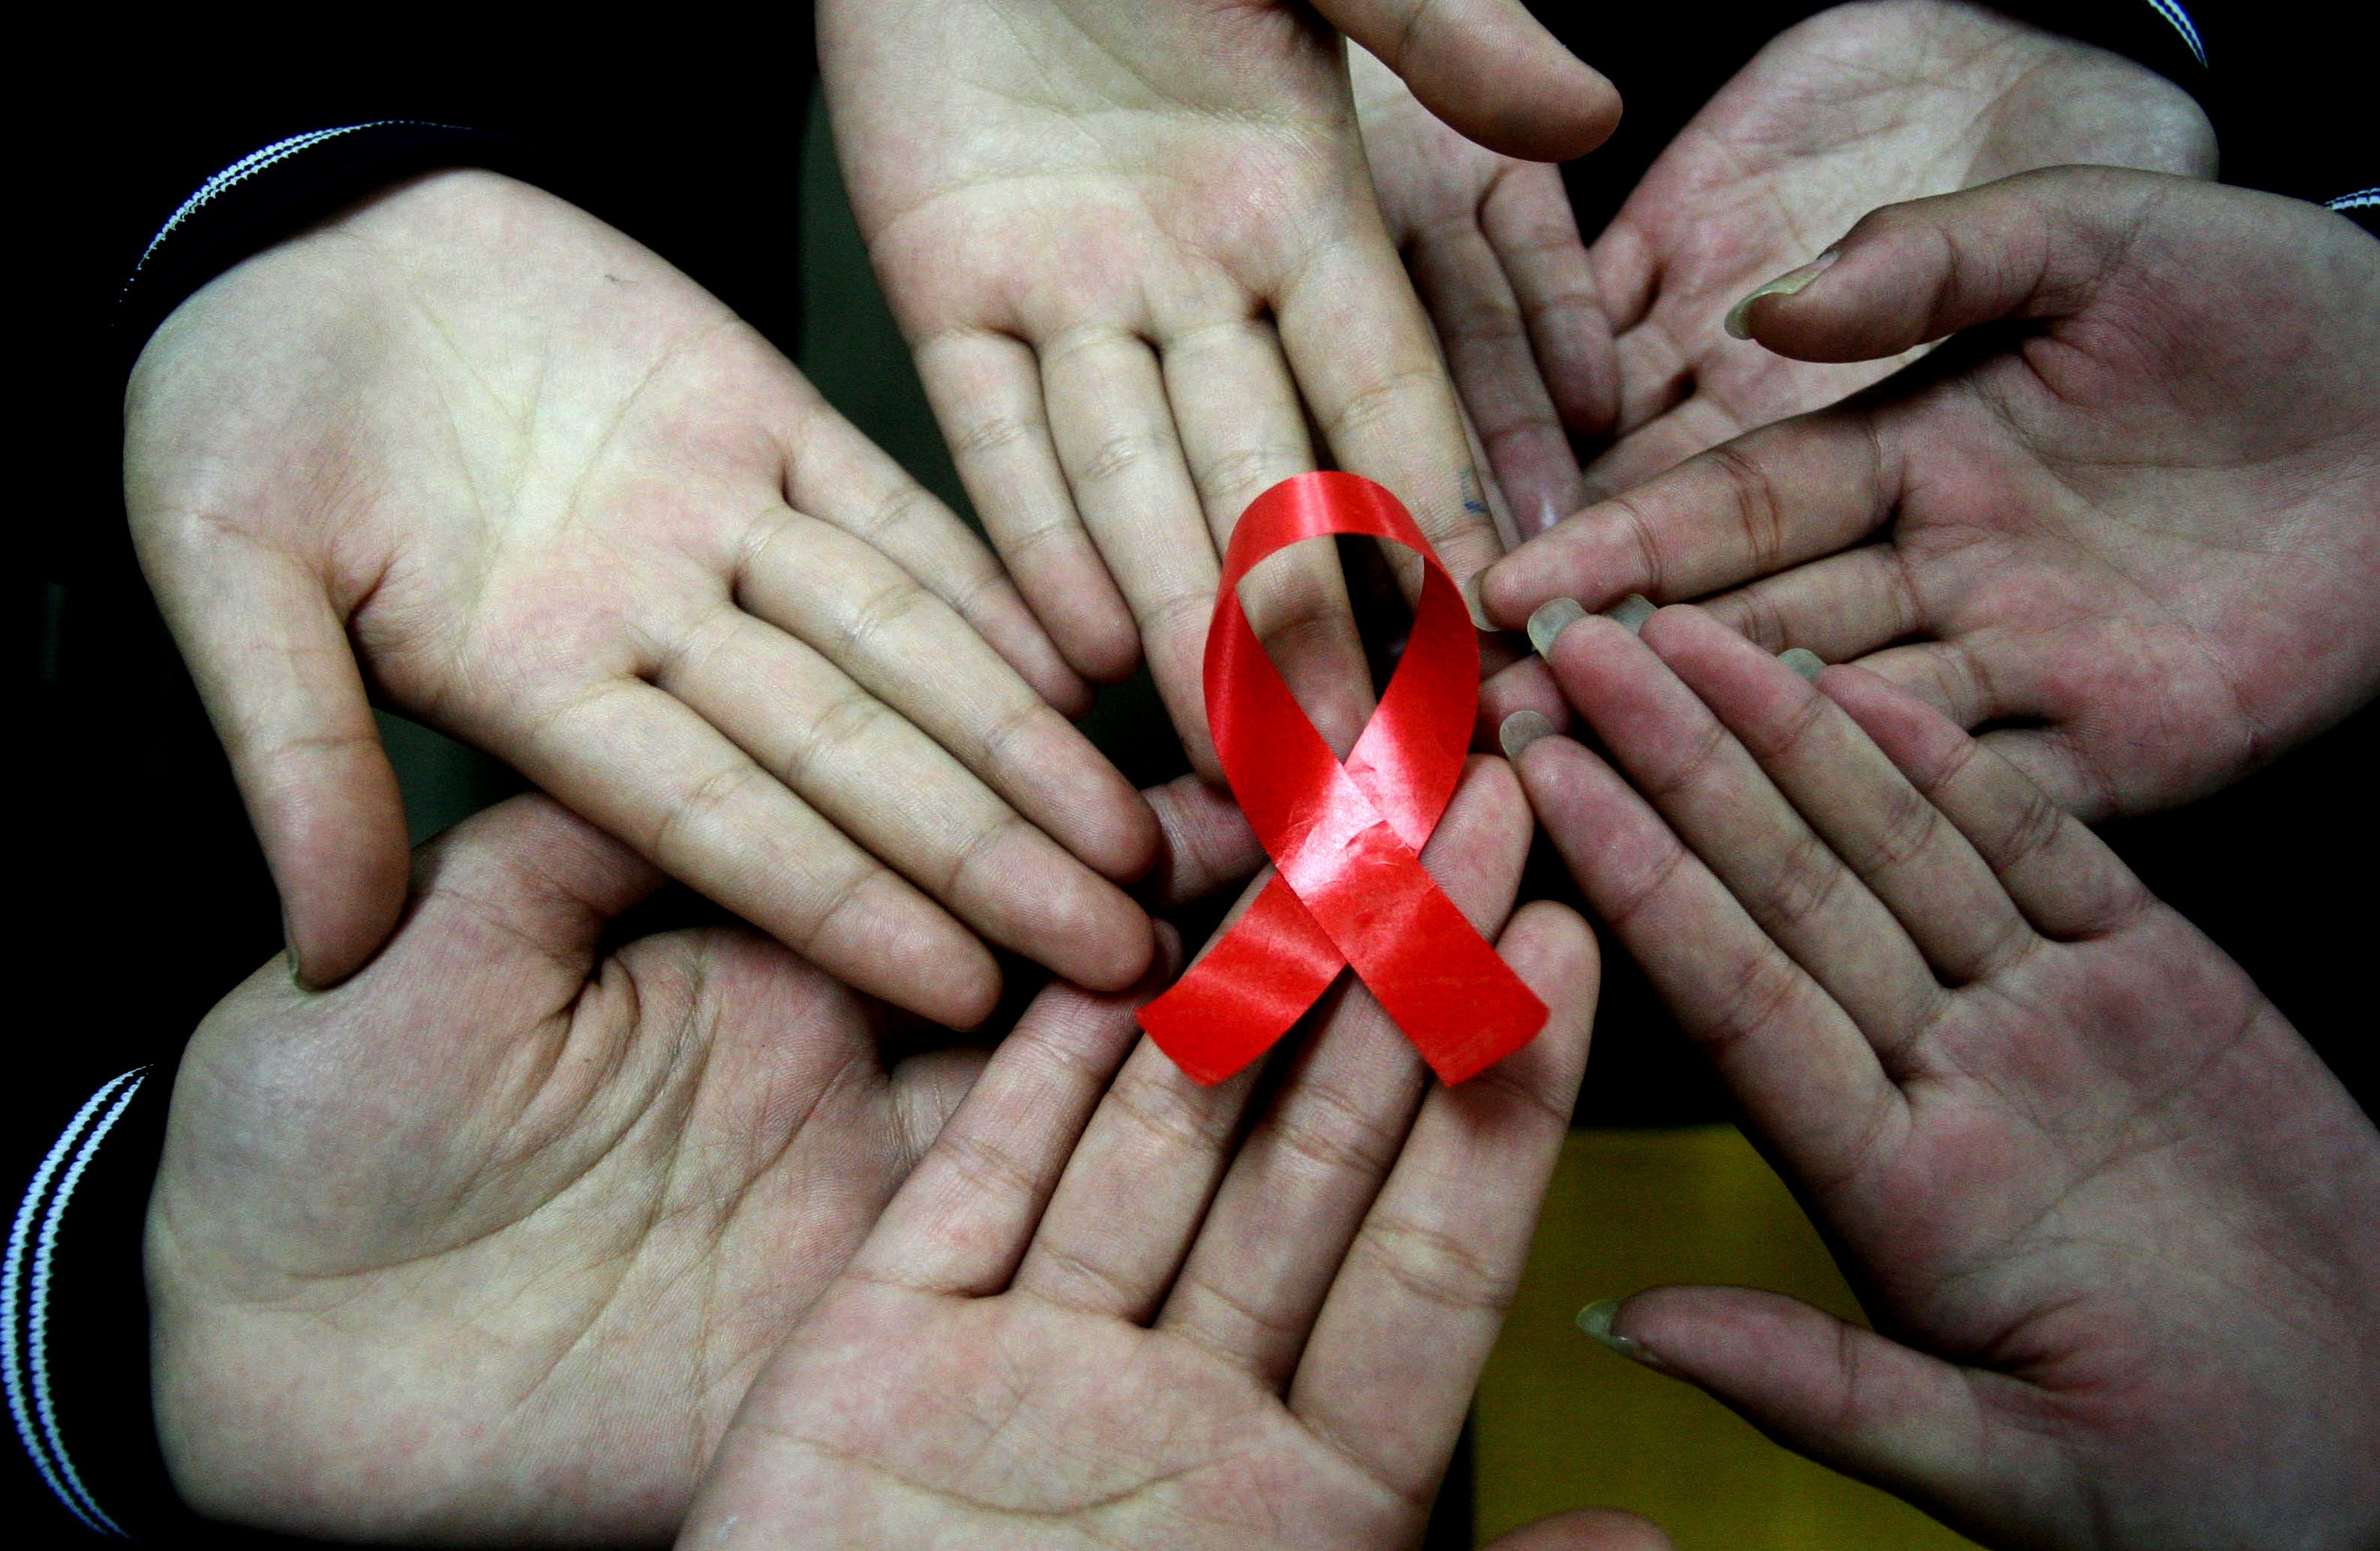 Some HIV-positive patients say the stigma of the disease in Hong Kong remains despite progress in medical treatment. Photo: AFP